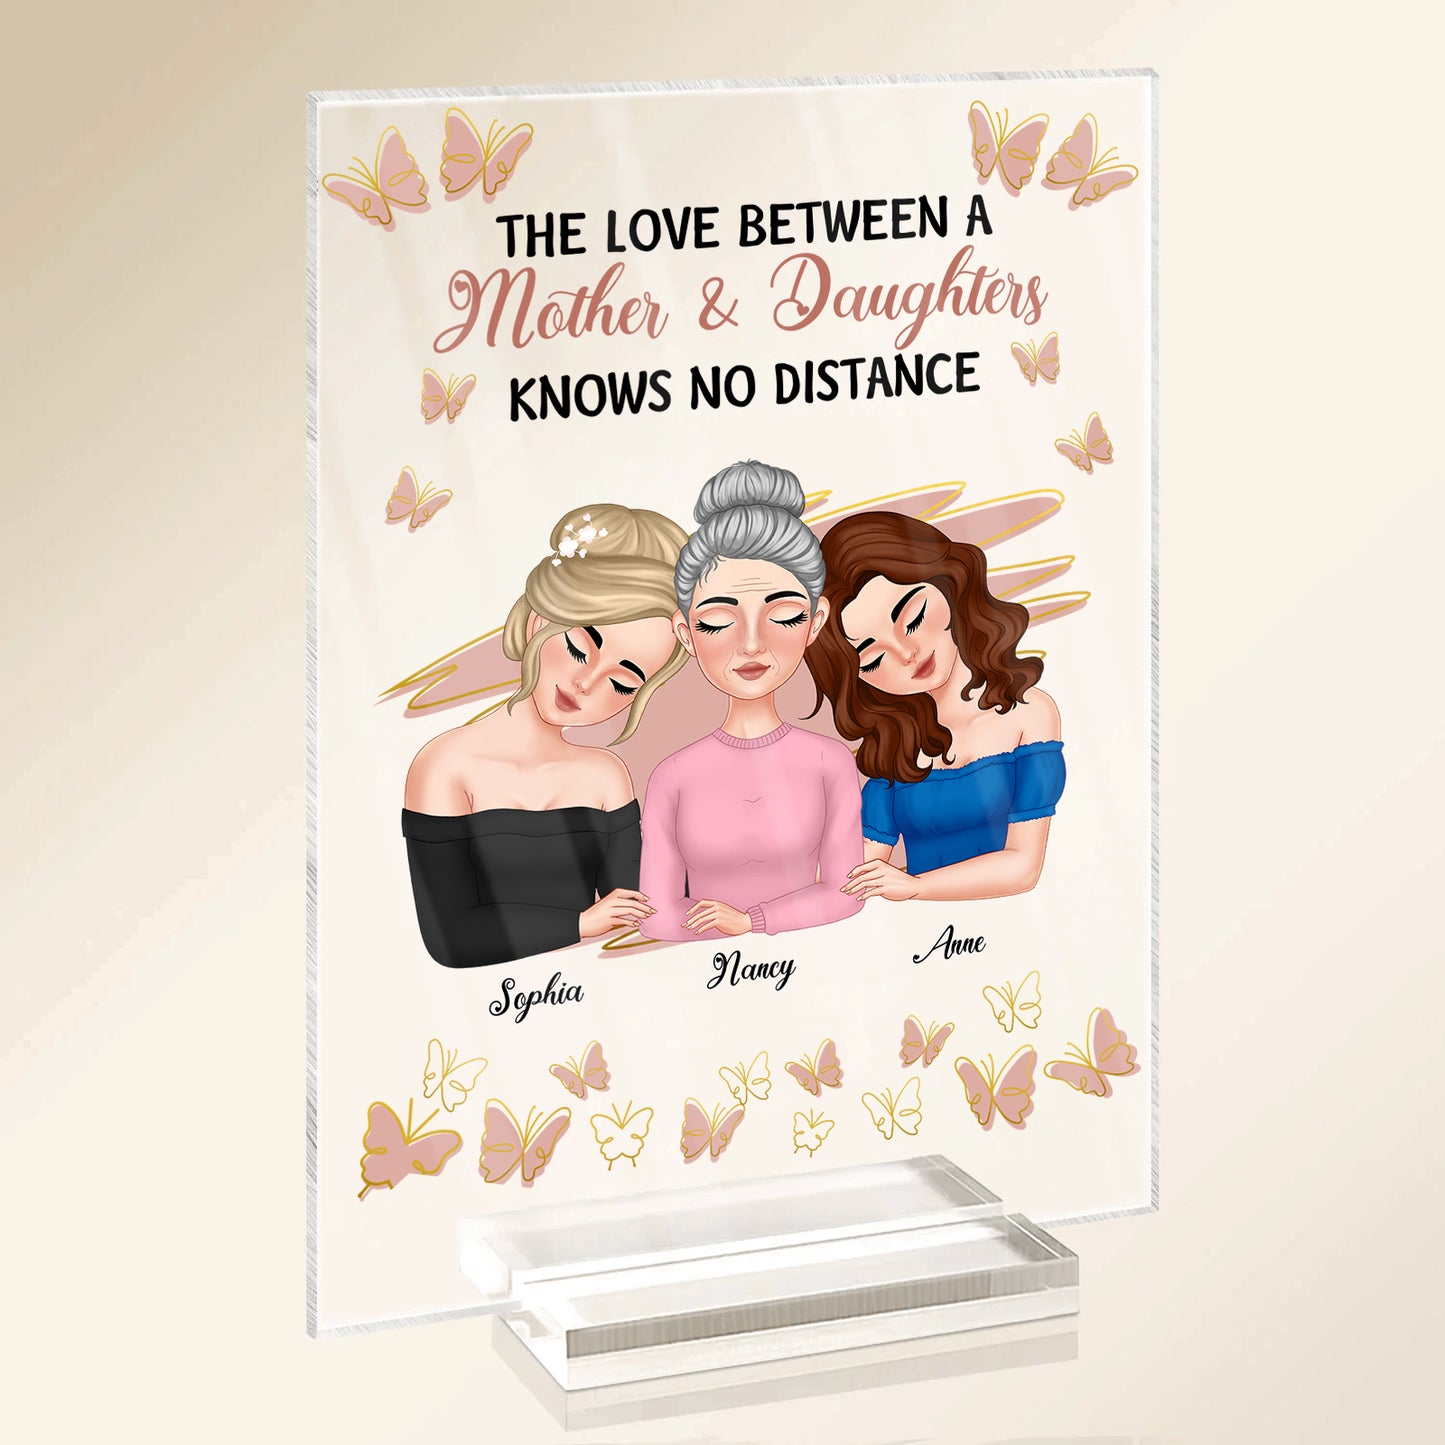 Mother - The Love Between A Mother & Daughters Is Forever - Personalized Acrylic Plaque